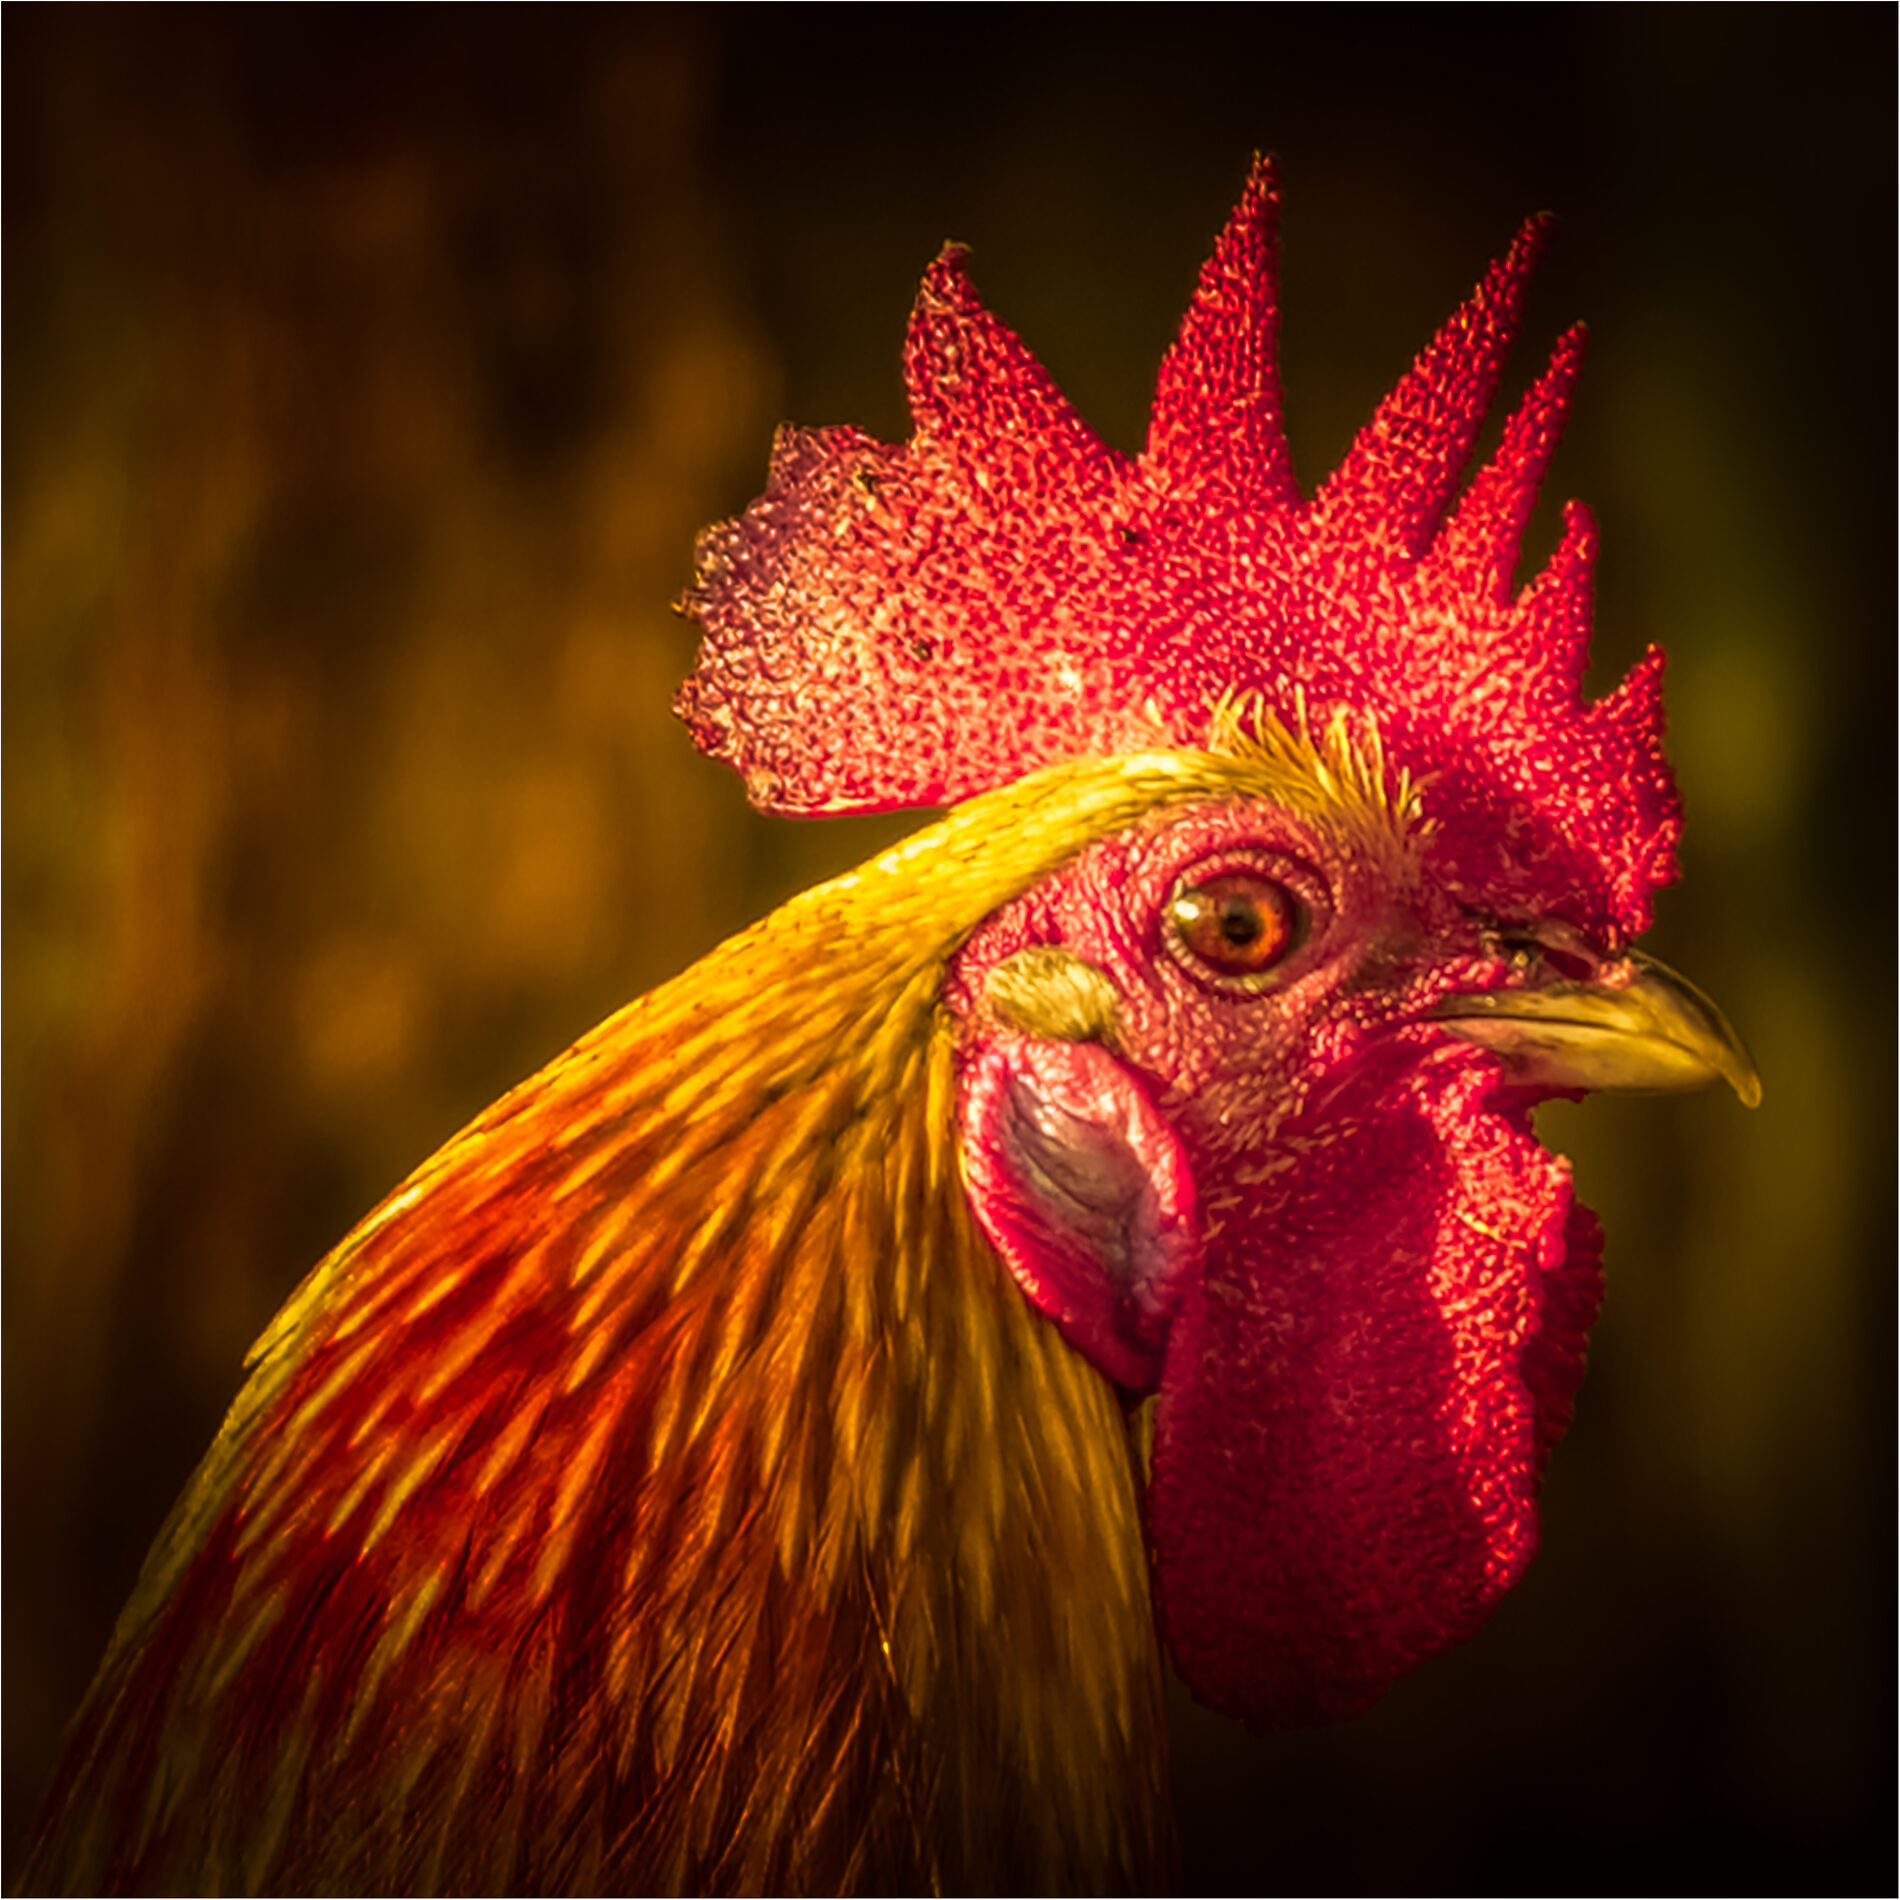 Close-up on the profile of a red and yellow rooster's head.